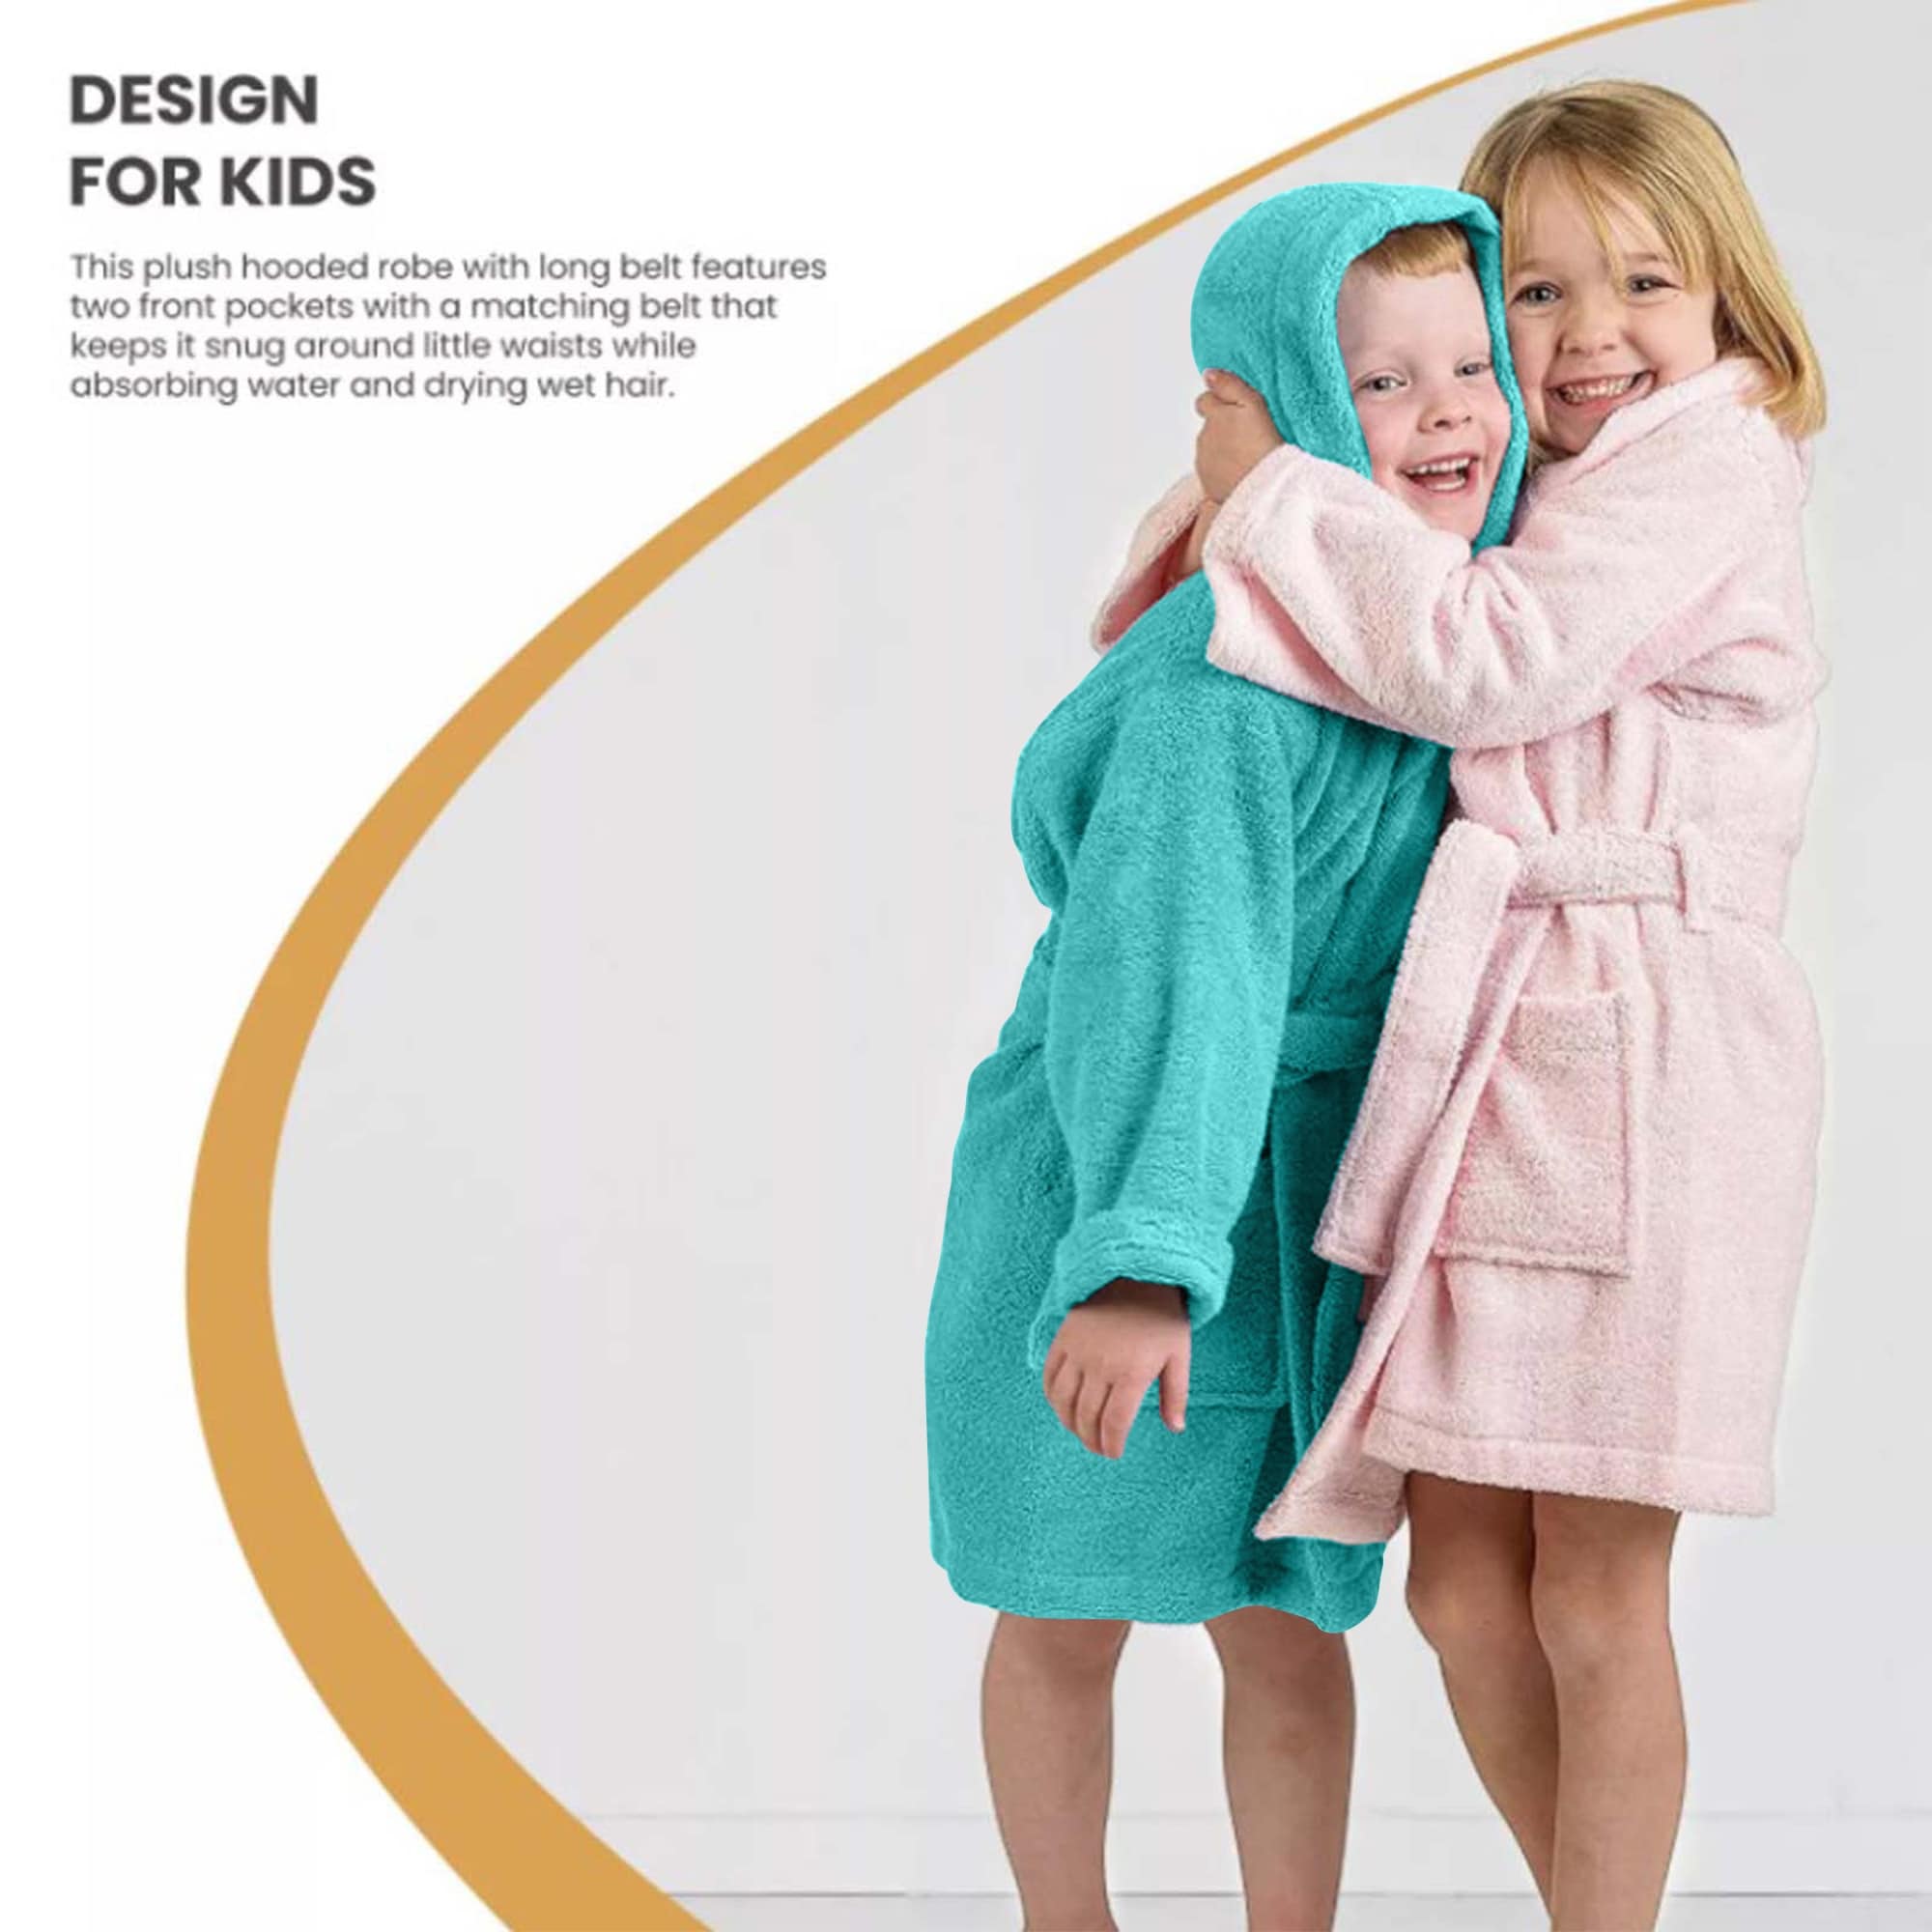 Kids Robes :: Terry Kids Robes :: 100% Turkish Cotton Royal Blue Hooded  Terry Kid's Bathrobe - Wholesale bathrobes, Spa robes, Kids robes, Cotton  robes, Spa Slippers, Wholesale Towels